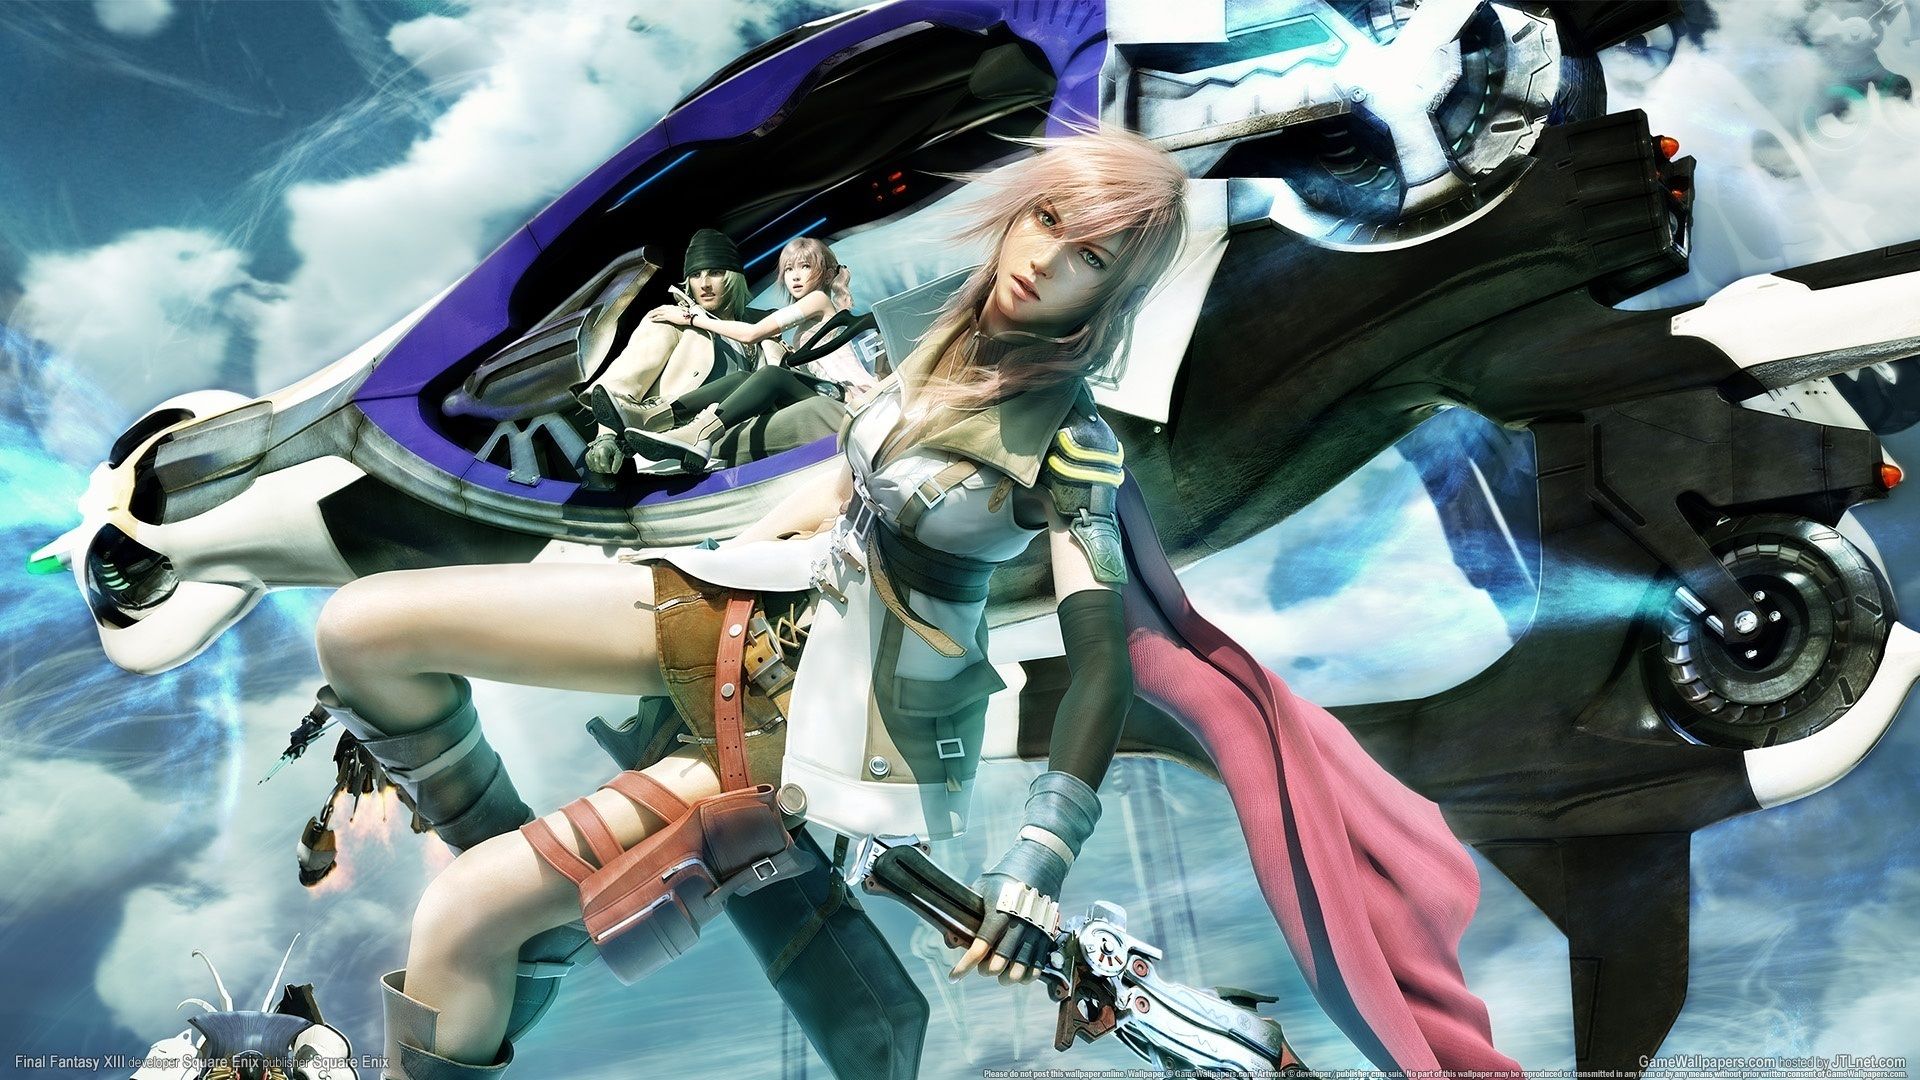 Wallpaper Final Fantasy XIII game characters 1920x1080 Full HD 2K Picture, Image